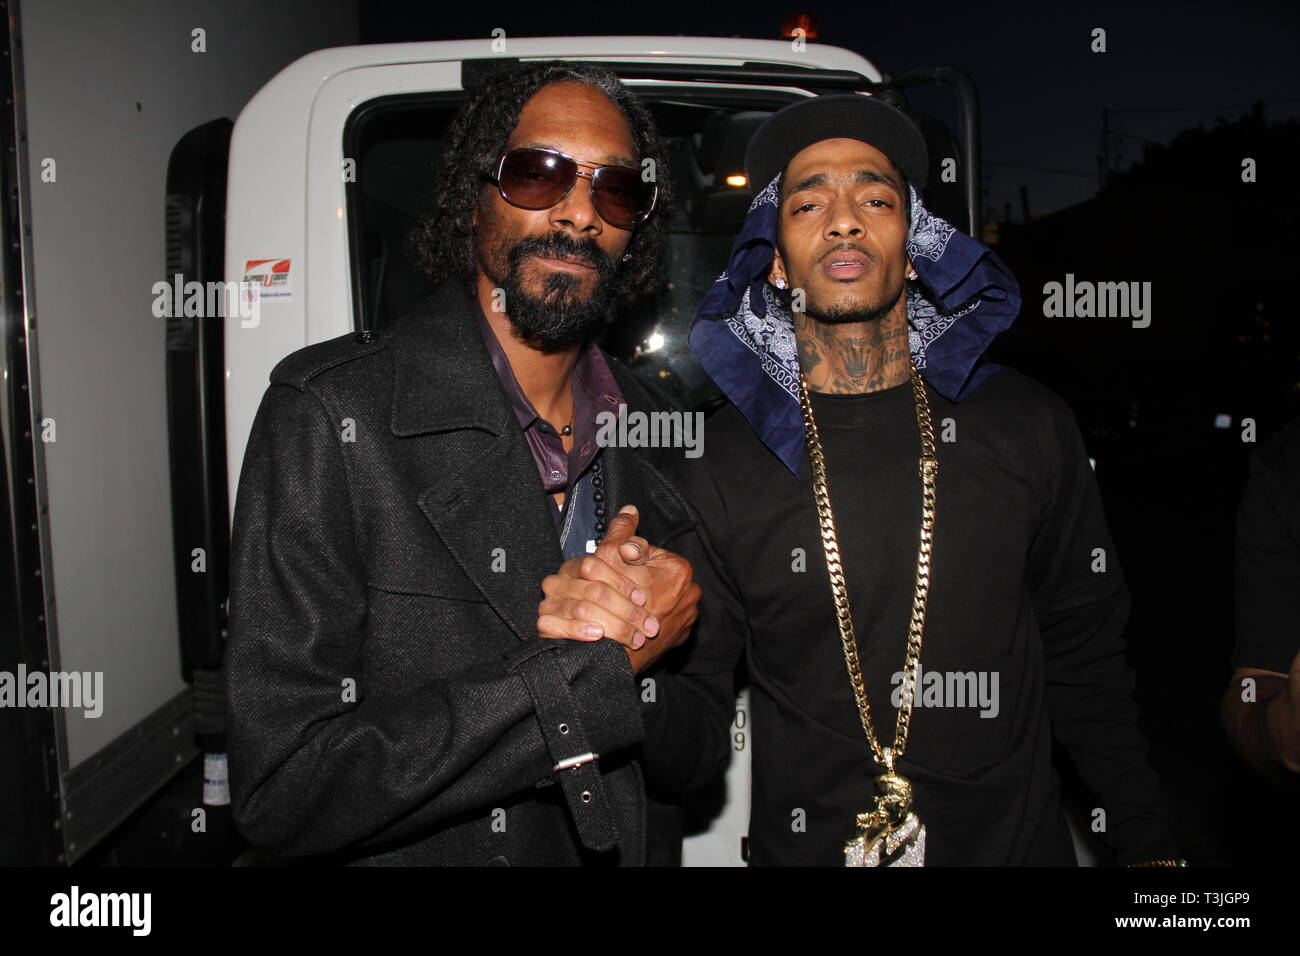 West Hollywood, Ca. 11th Feb, 2019. Snoop Dogg & Nipsey Hussle on the set of the Young Jeezy 'R.I.P.' Video Shoot at Greystone Manor February 11, 2013 in West Hollywood, California. Credit: Walik Goshorn/Mediapunch/Alamy Live News Stock Photo